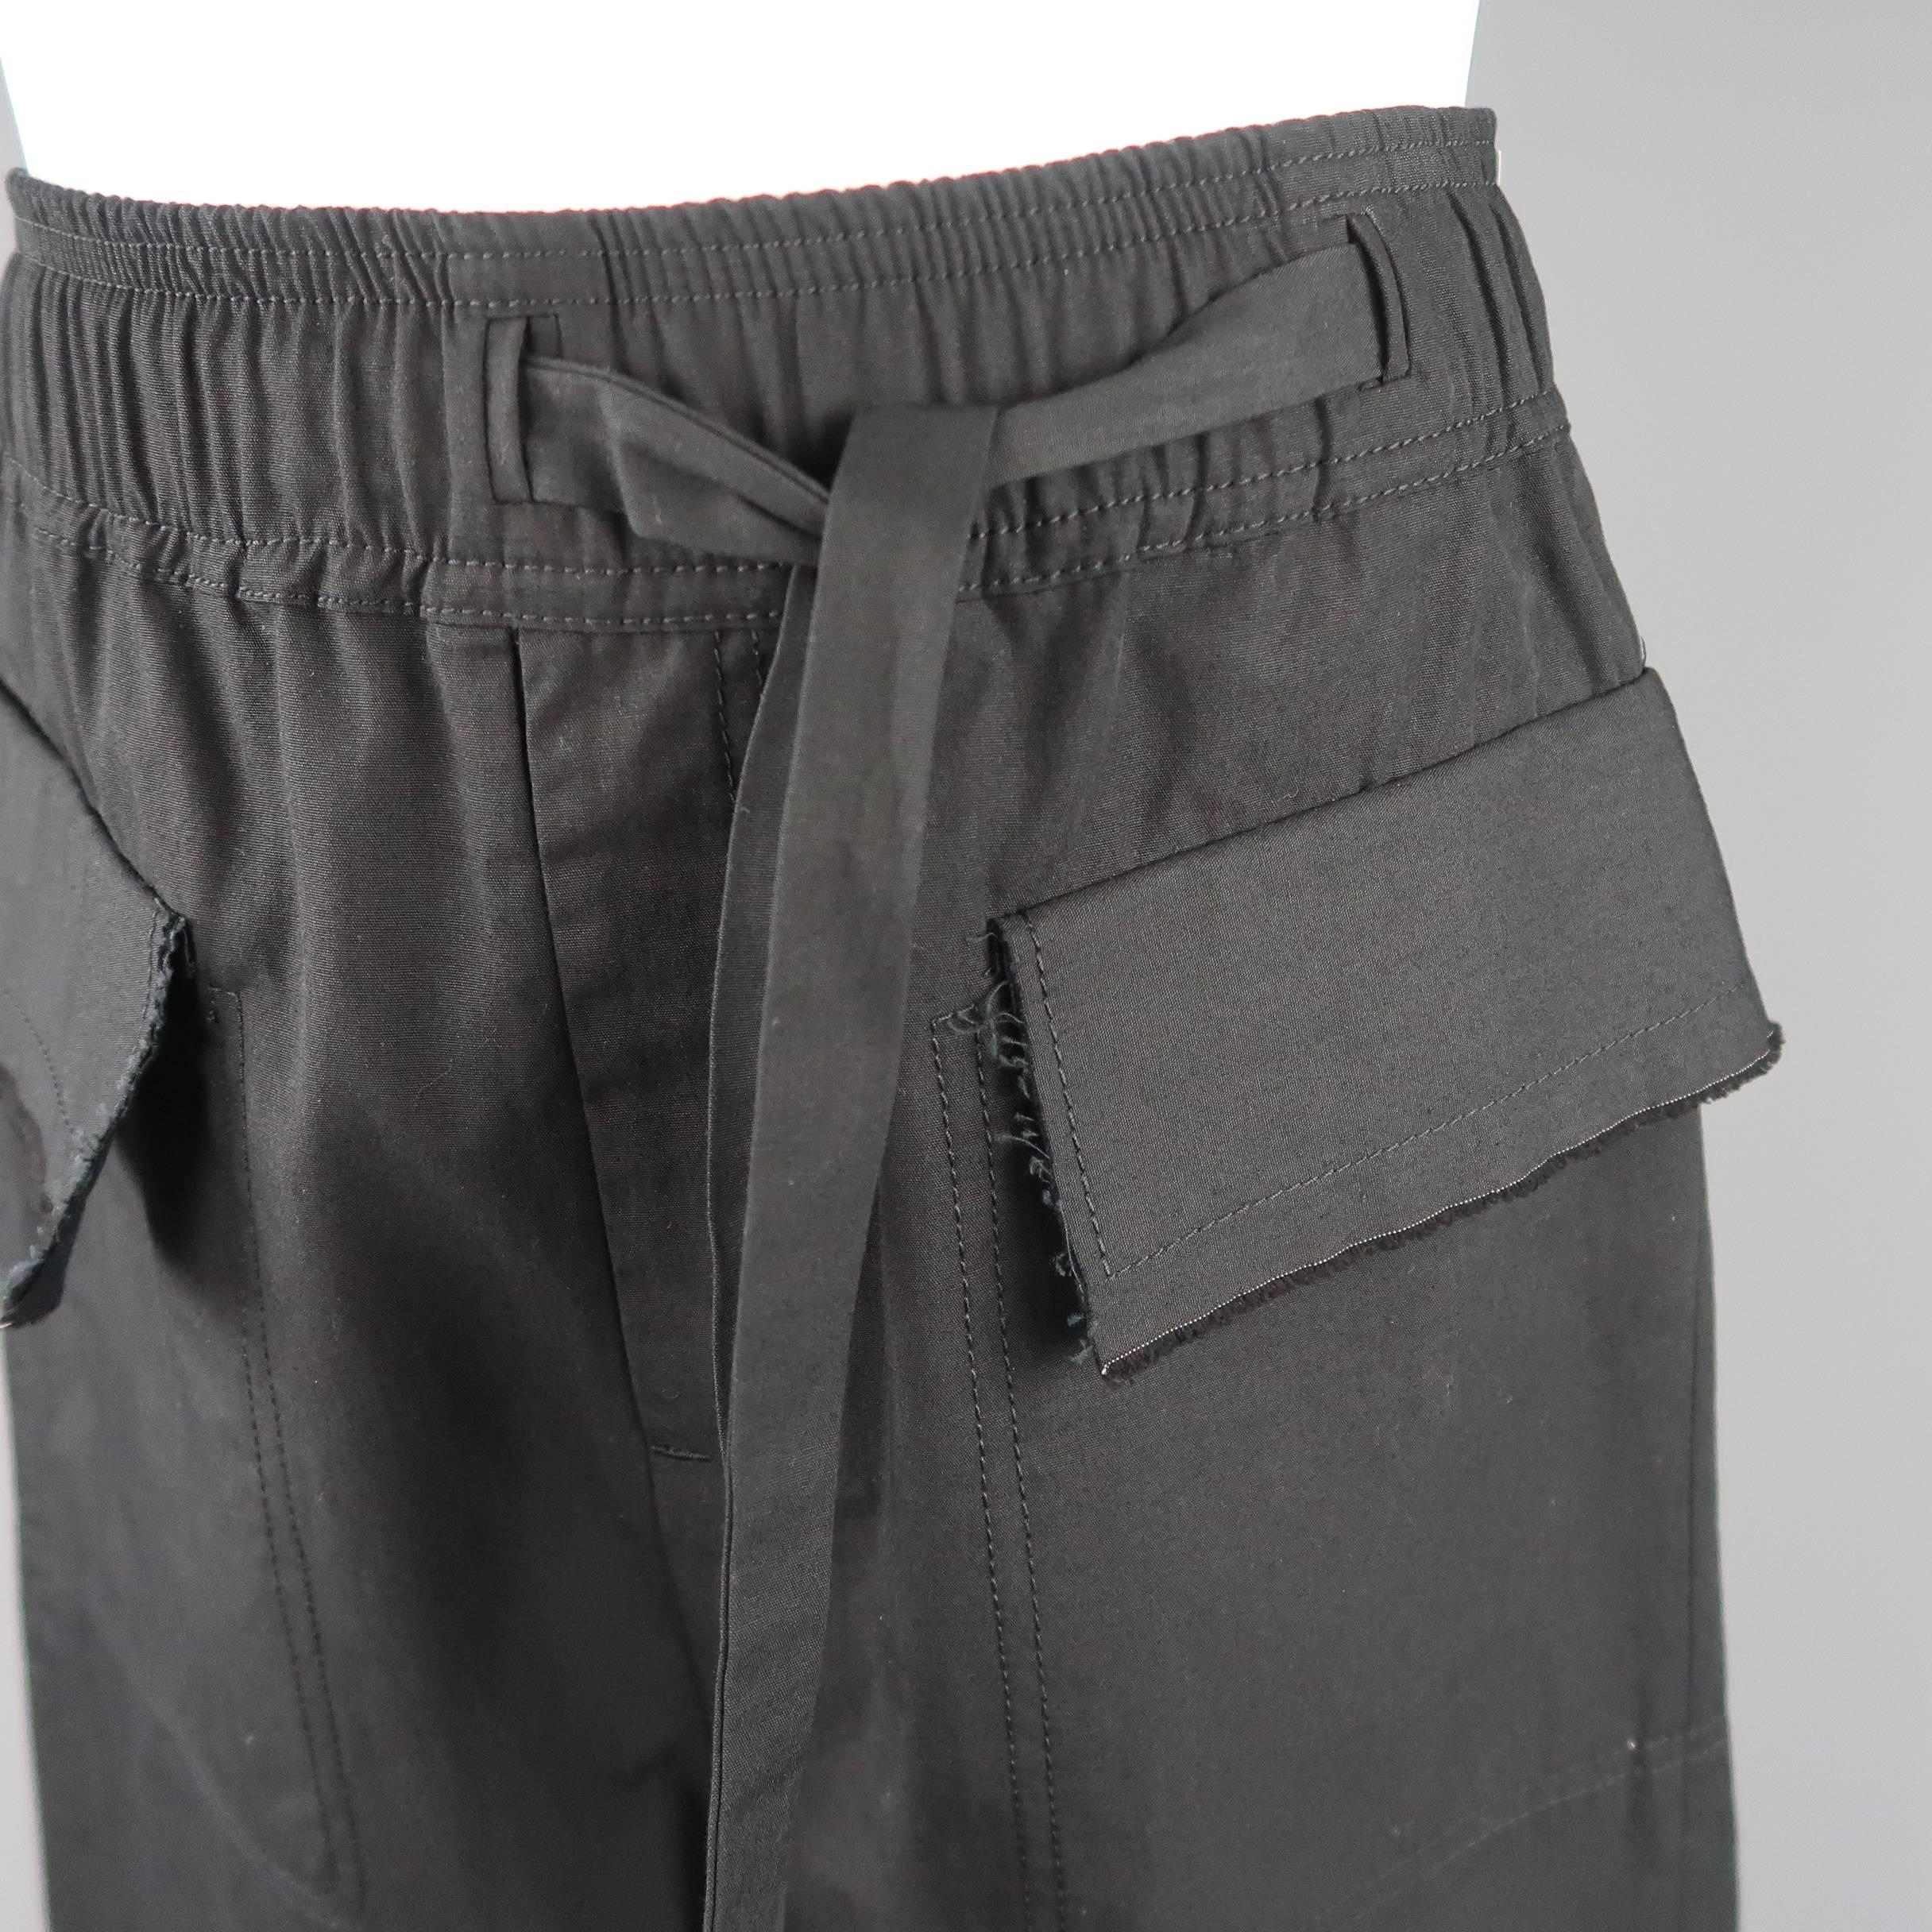 DAMIR DOMA shorts come in black cotton with an elastic waist band, asymmetrical tie, flap pockets with raw edge trim, and drop crotch panel. Made in Italy.
 
New with Tags.
Marked: S
 
Measurements:
 
Waist: 30 in.
Rise: 19 in.
Inseam: 11 in.
 
